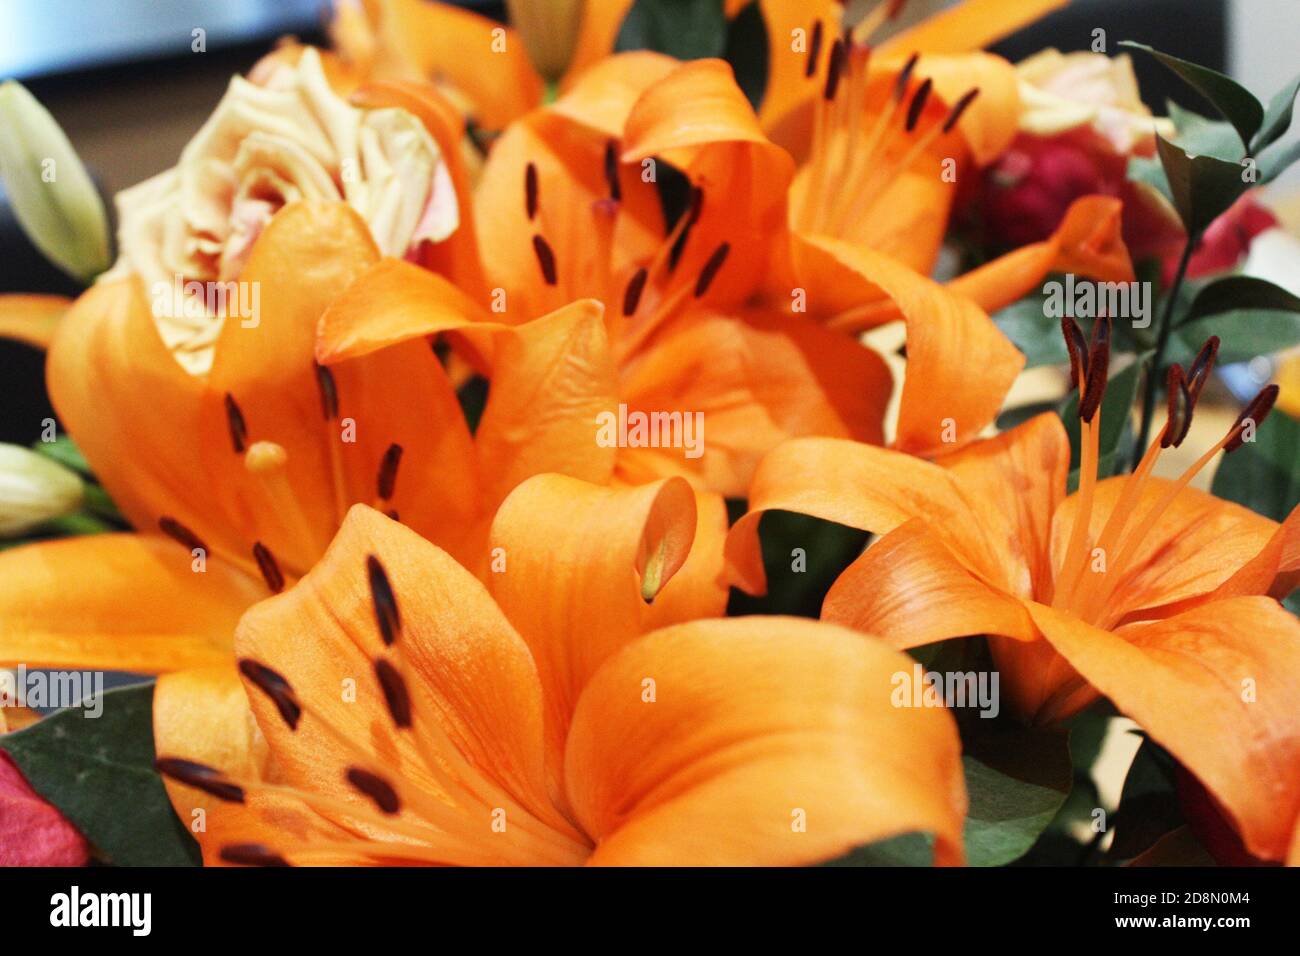 Close up bouquet/bunch of Orange County king lilies (Lilium) and orange ...